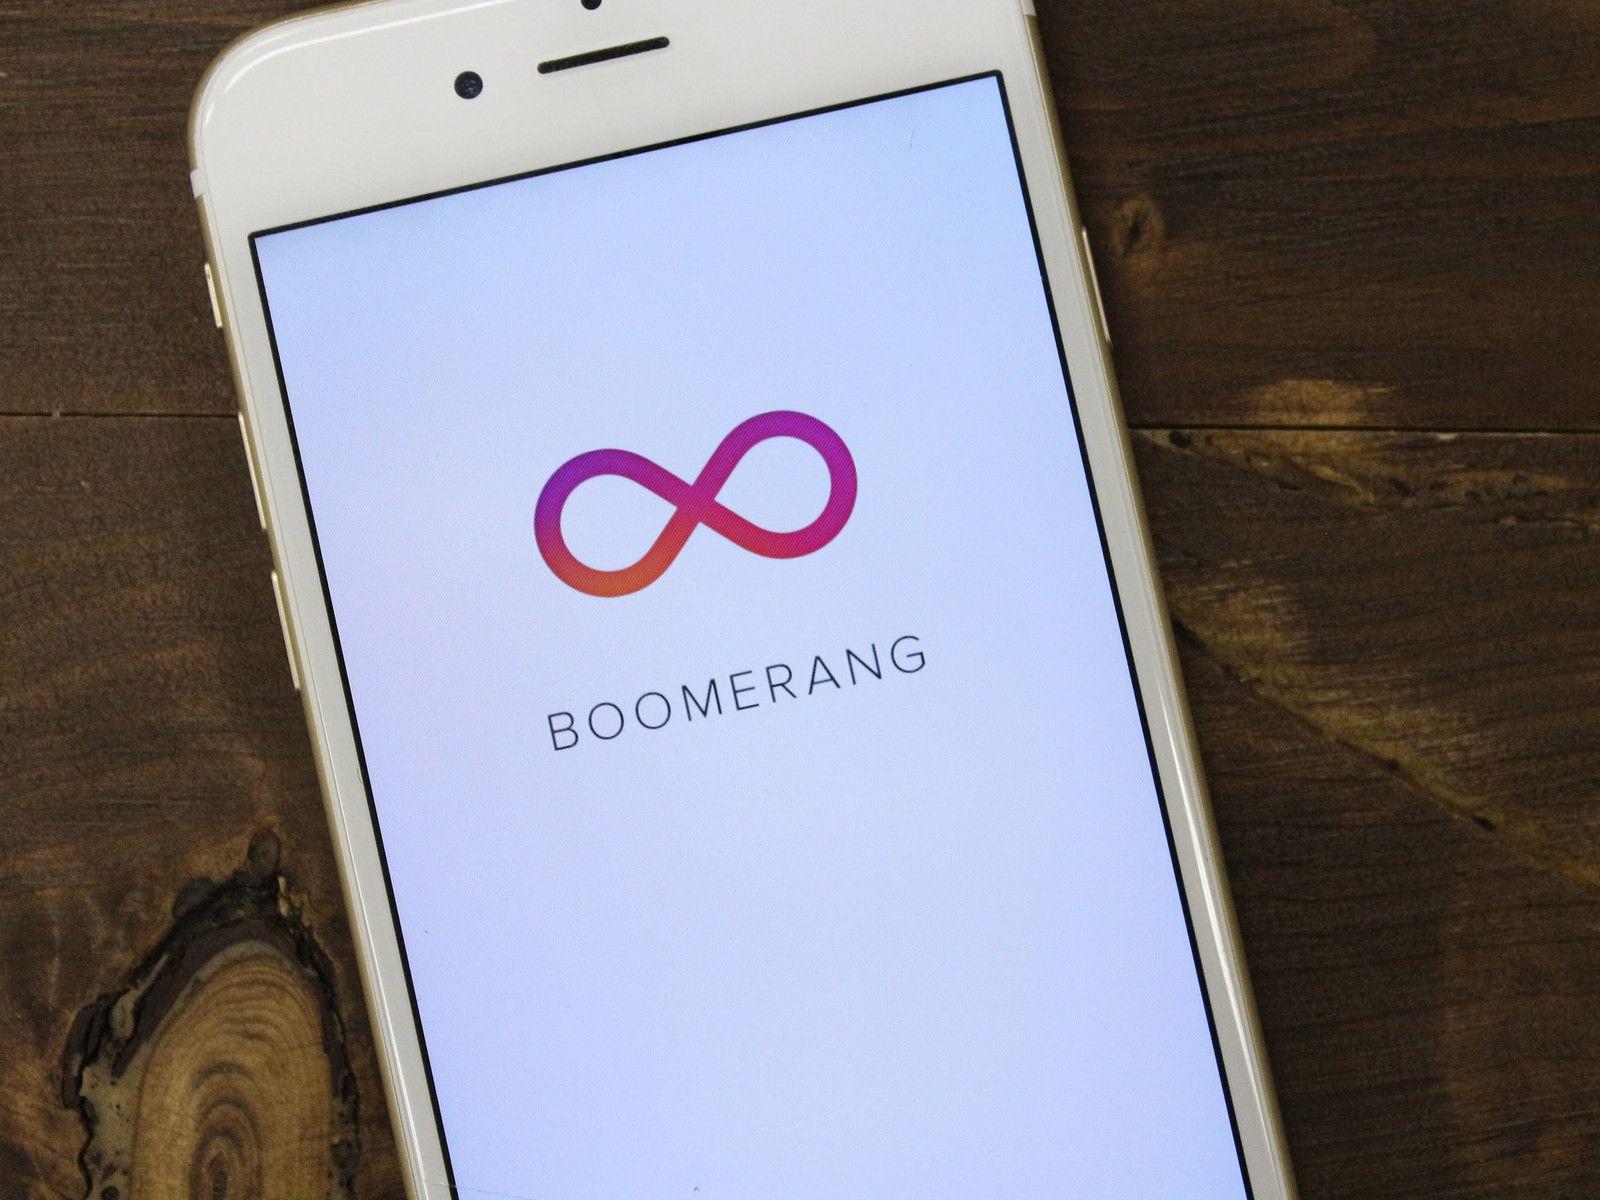 With 2 Silver Boomerangs Logo - What the heck is Boomerang? | iMore